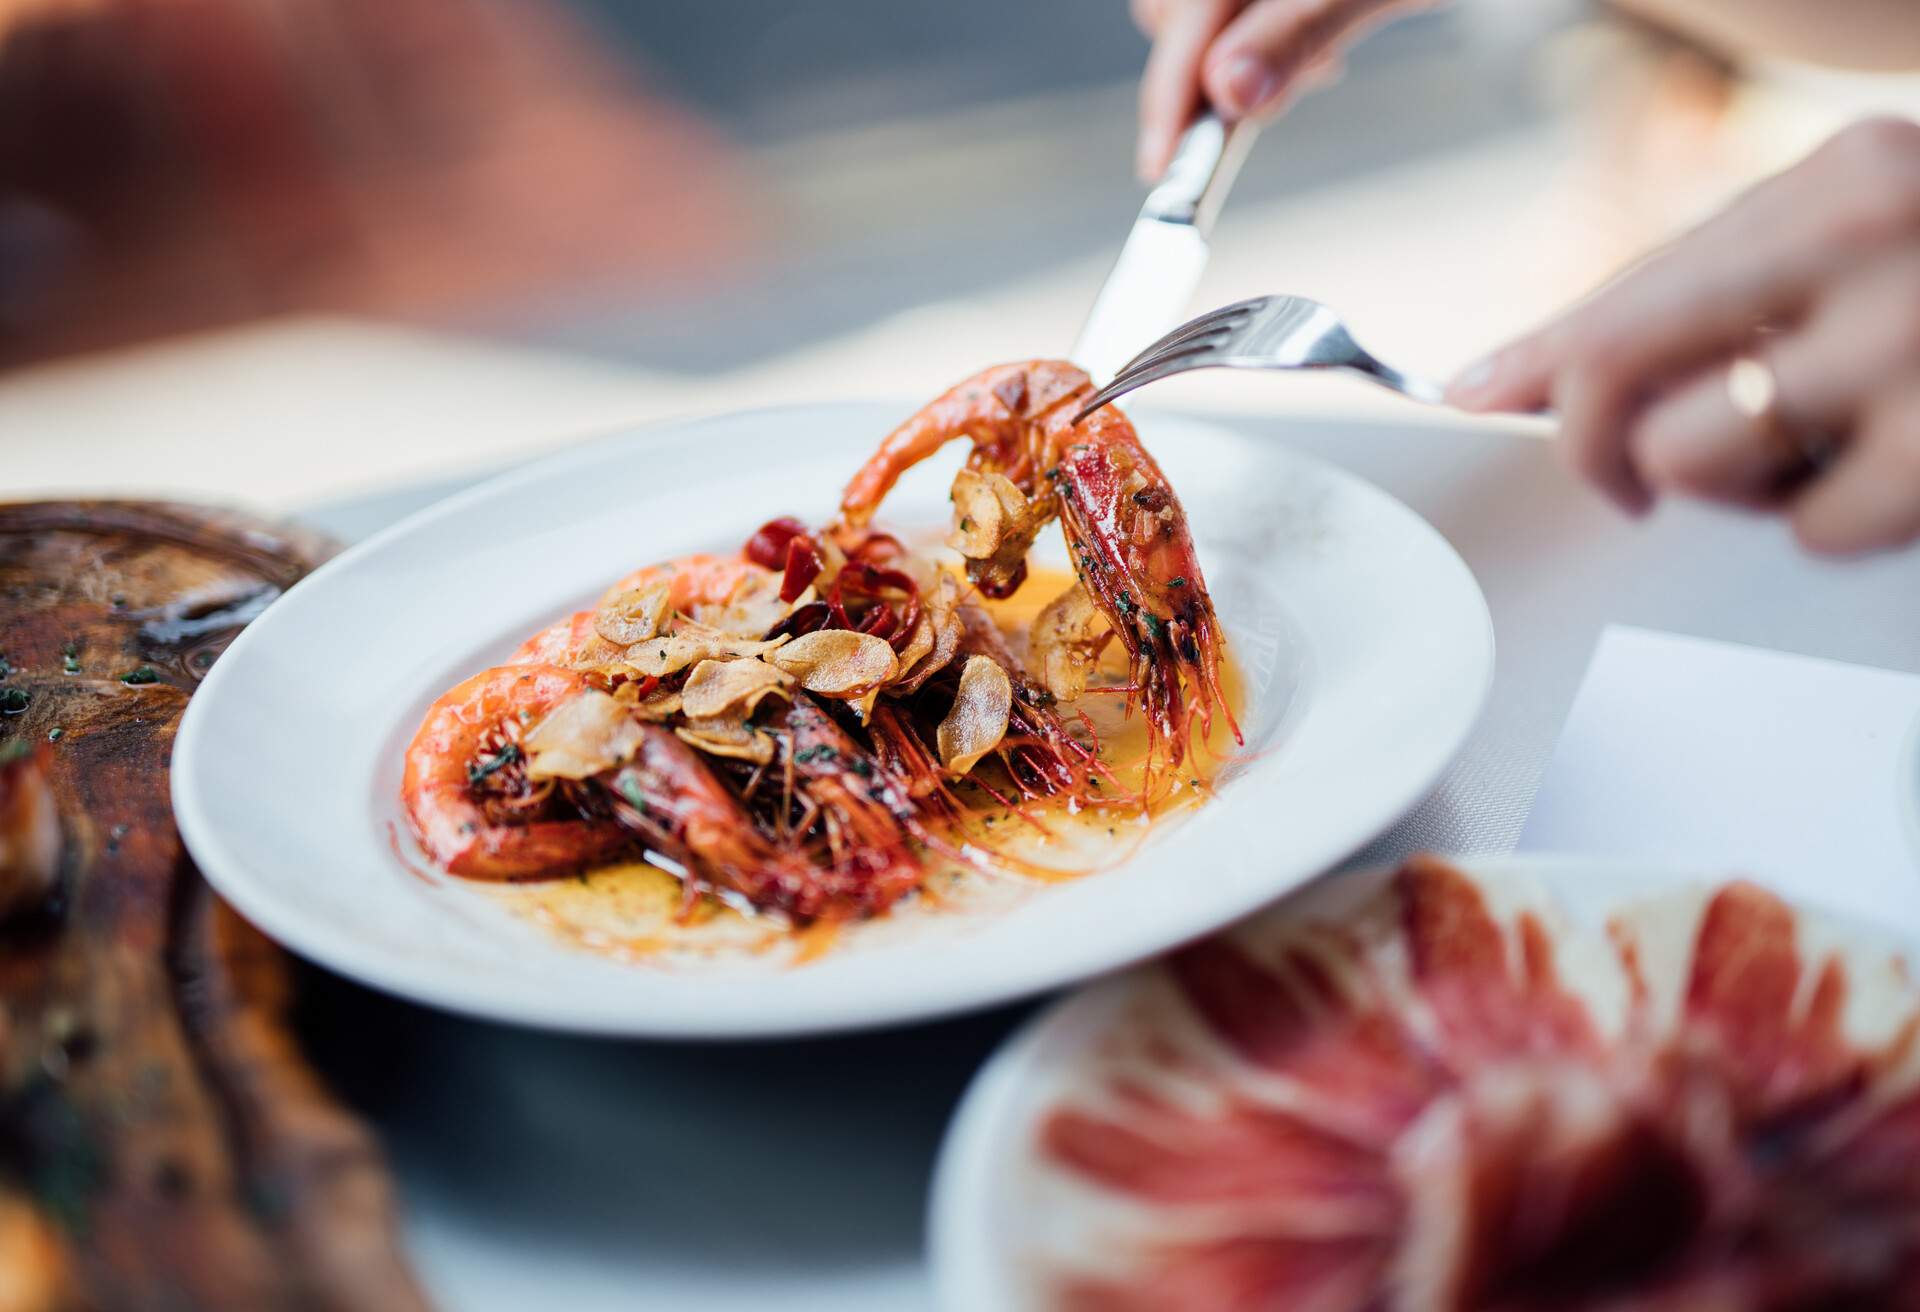 A plate of Spanish-style grilled shrimps, cooked with lemon juice, olive oil and sea salt. With Jamon Iberico in the background. Garlic prawn on a fork.